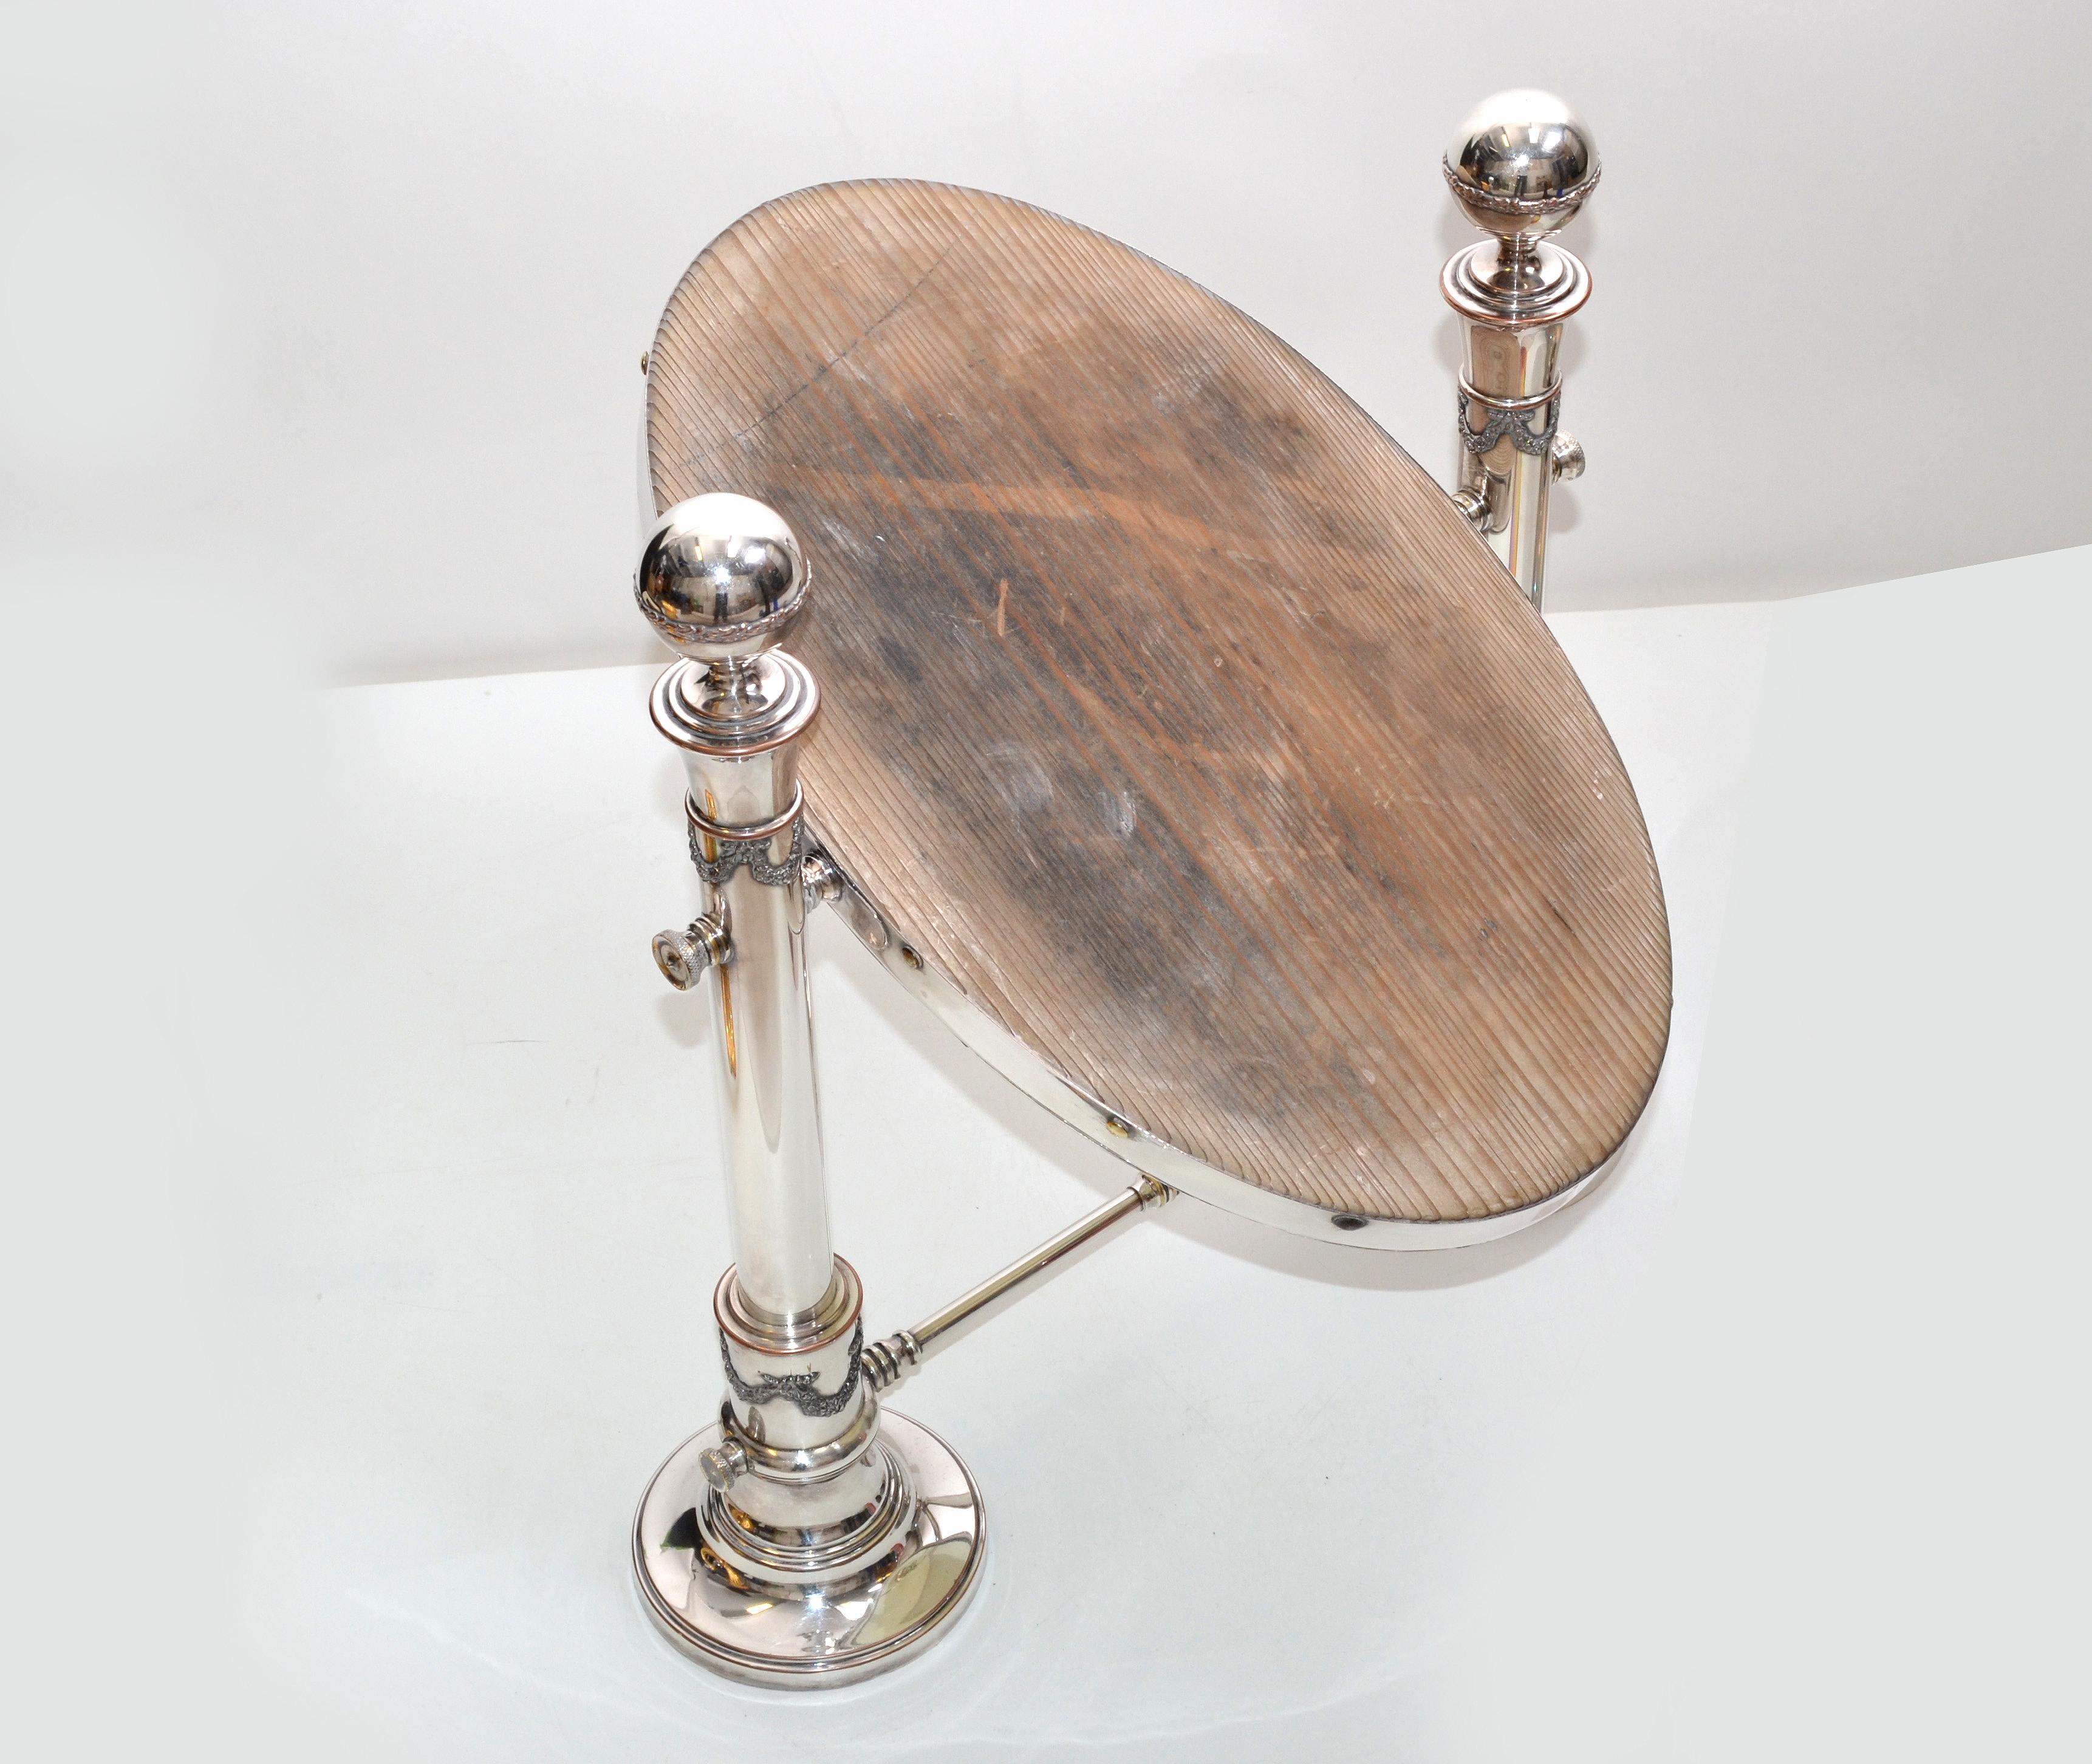 Silver British Colonial Antique 1910 Sheffield England Oval Vanity Mirror Pedestal For Sale